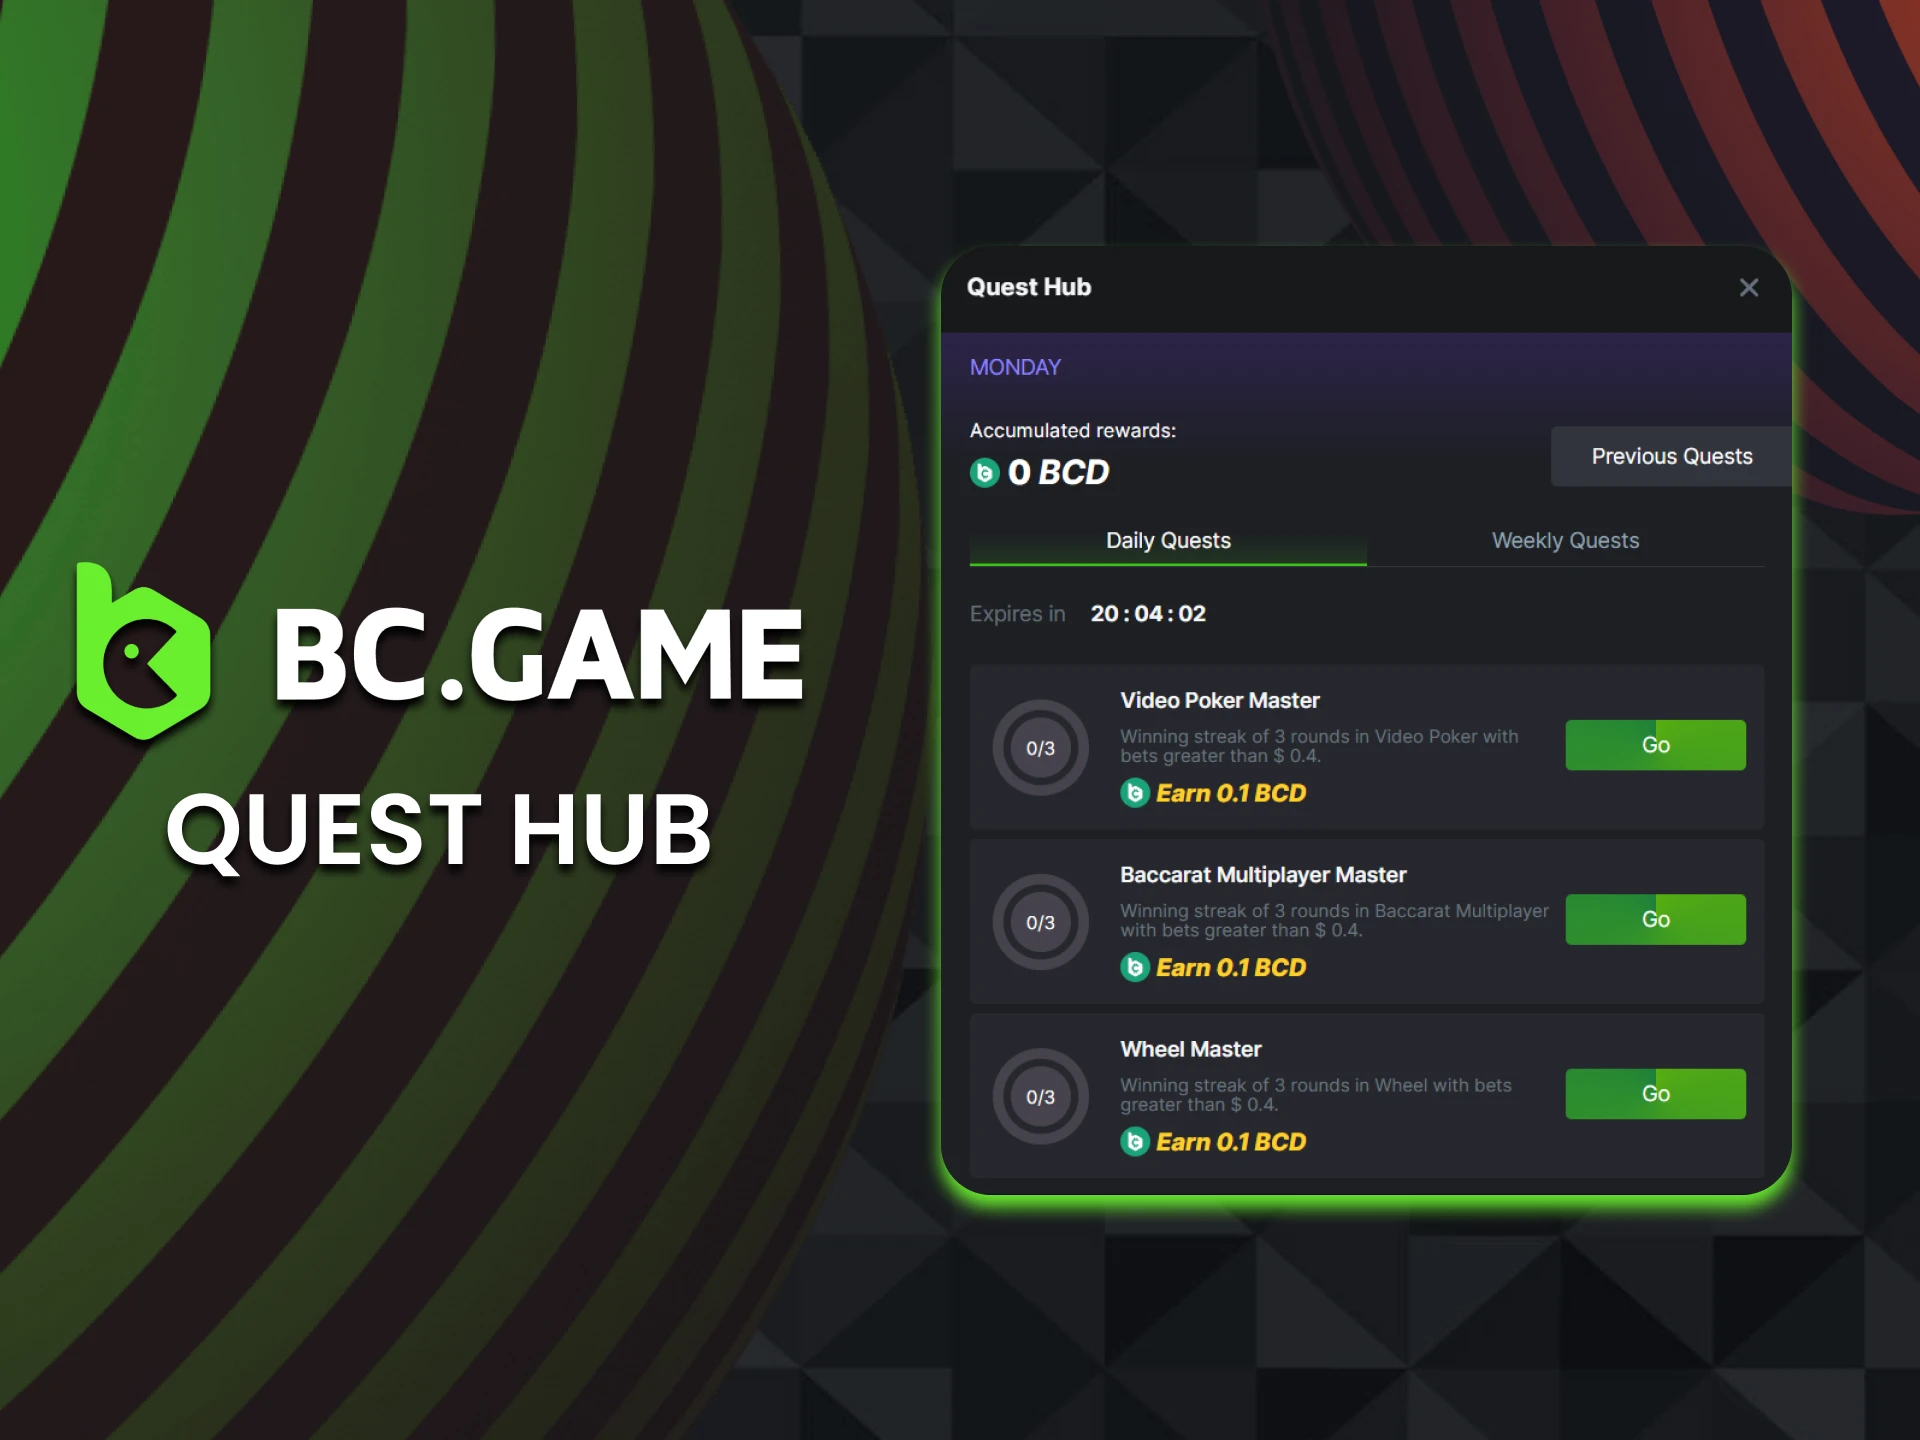 Be active, complete tasks, and get Quest Hub bonuses from BC Game.